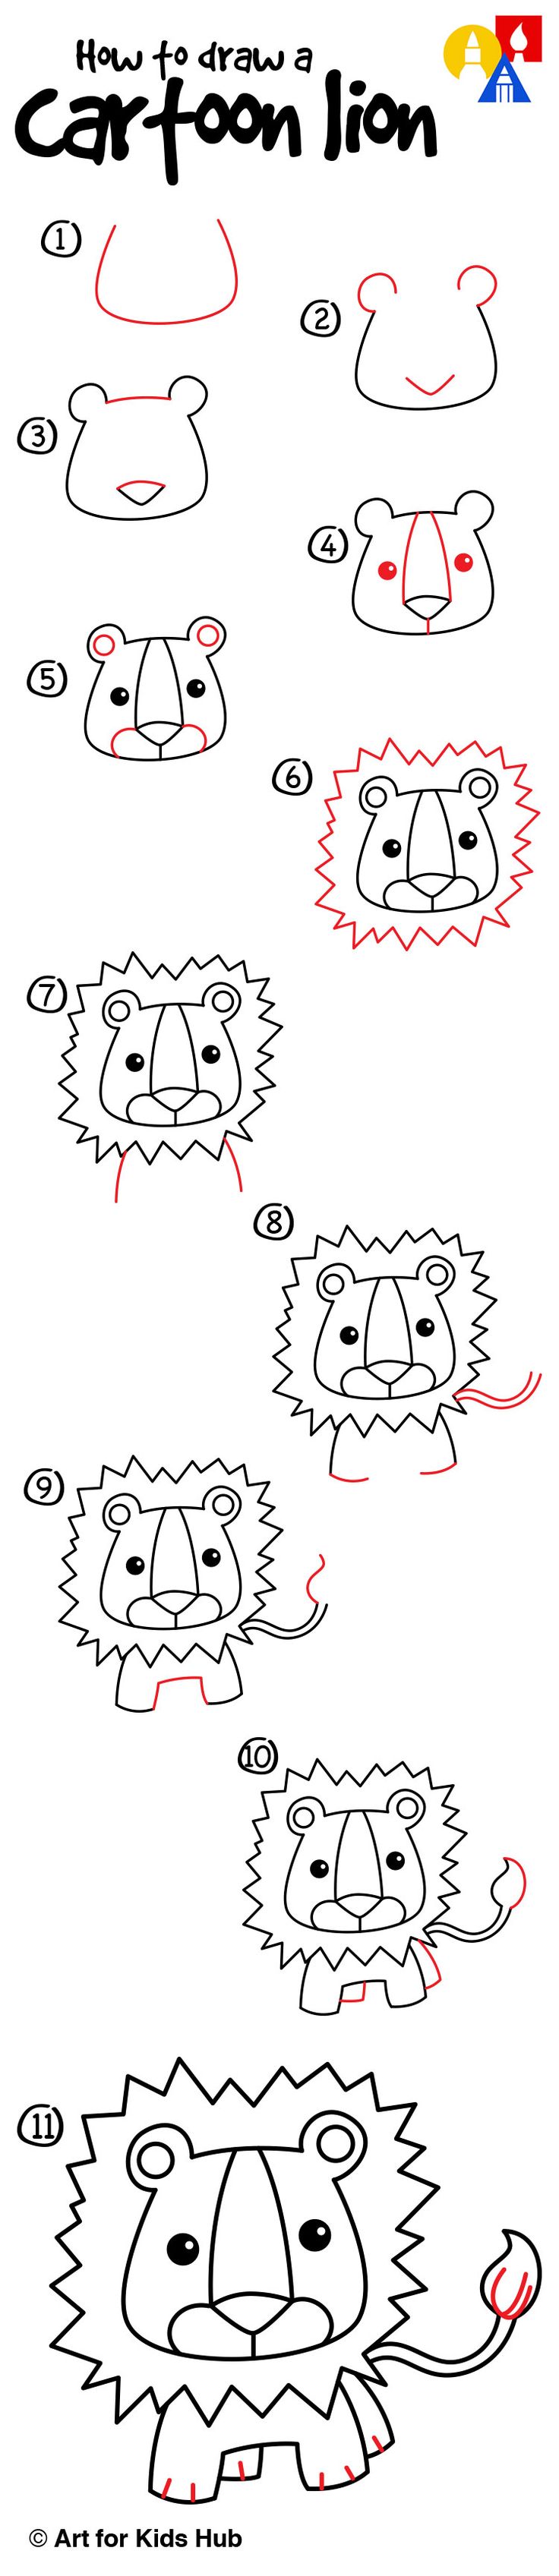 Learn how to draw a cartoon lion!